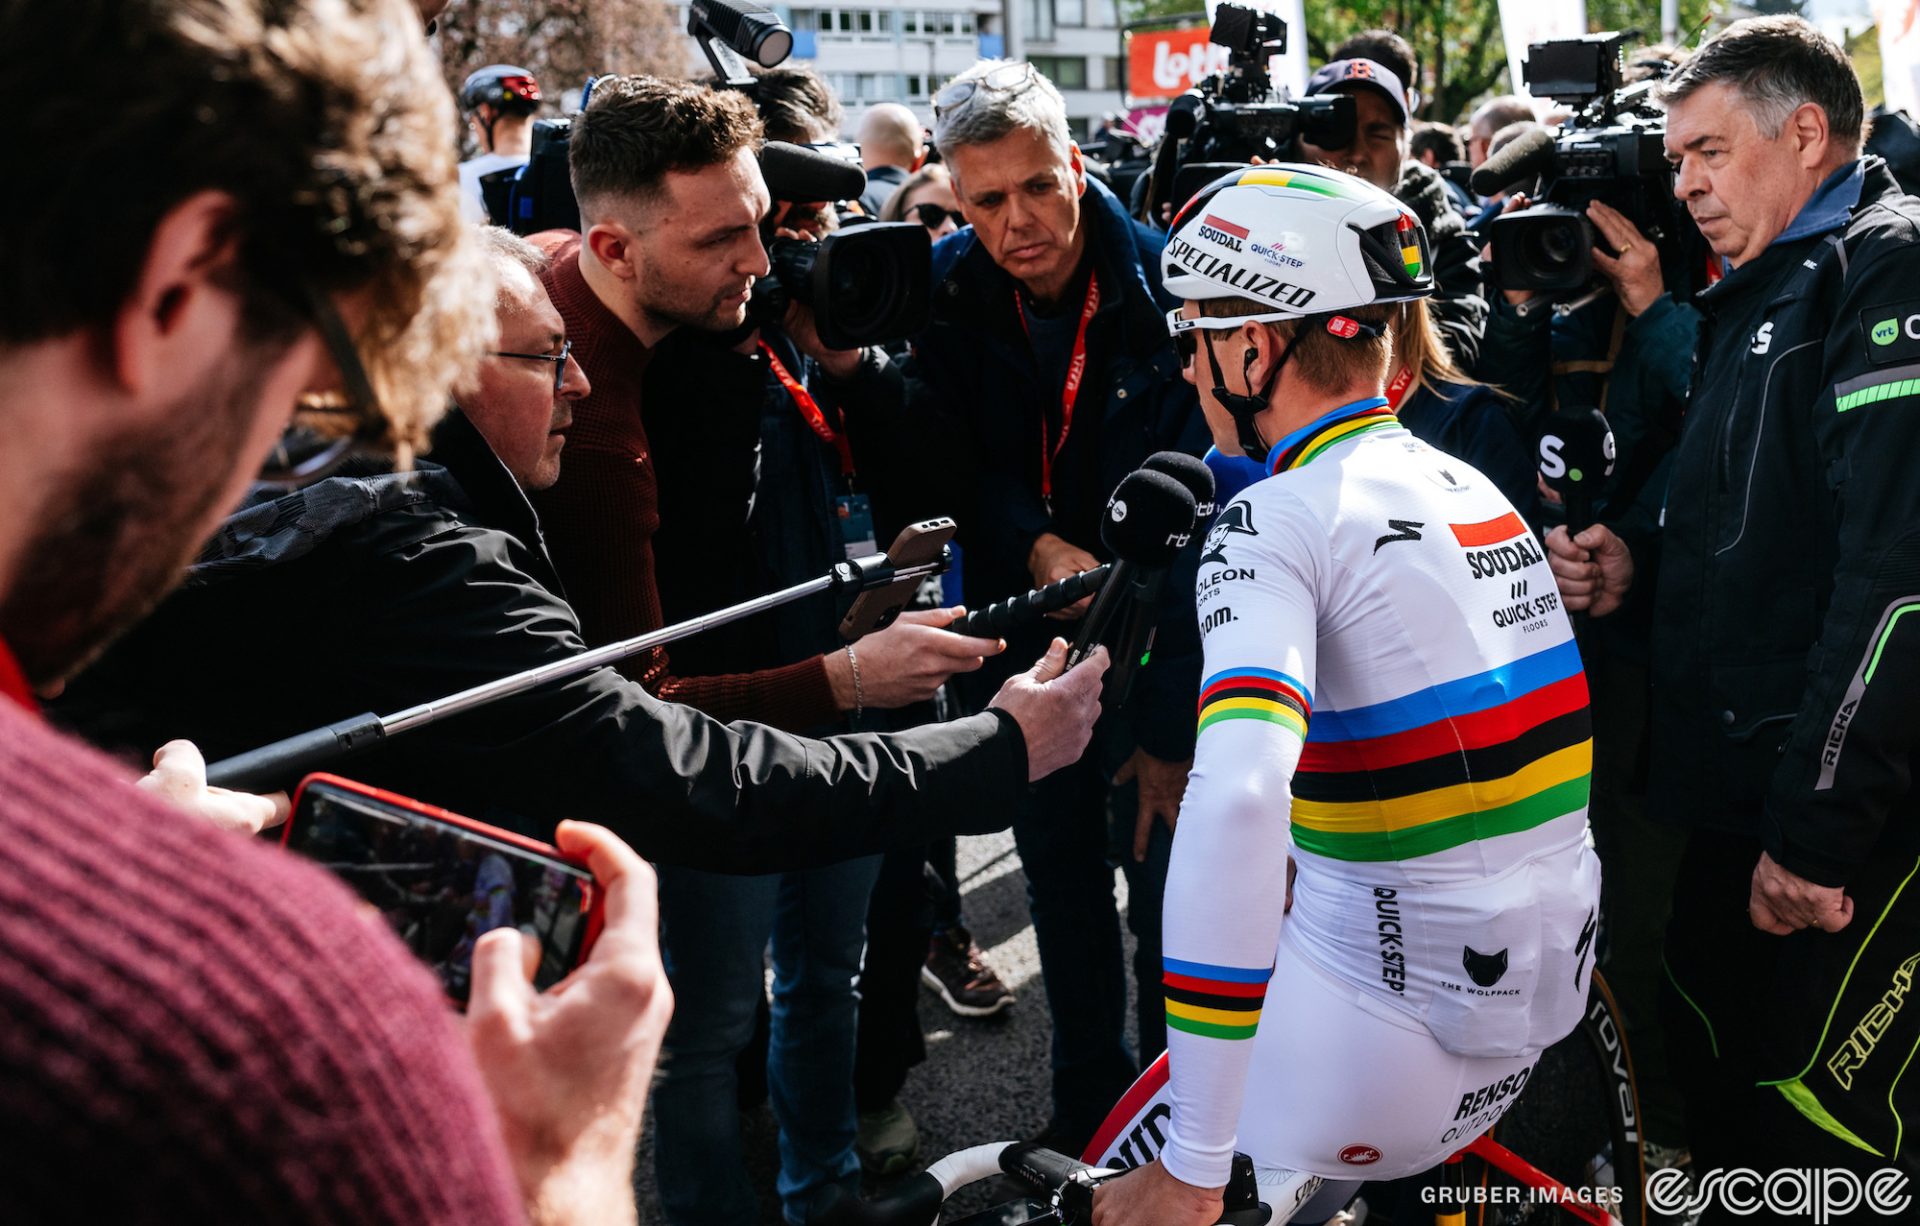 World Champion Remco Evenepoel faces a group of reporters at the 2023 Liege-Bastogne-Liege. Evenepoel is sitting on his bicycle's top tube, facing slightly away from the camera, with a bunch of microphones in his face.